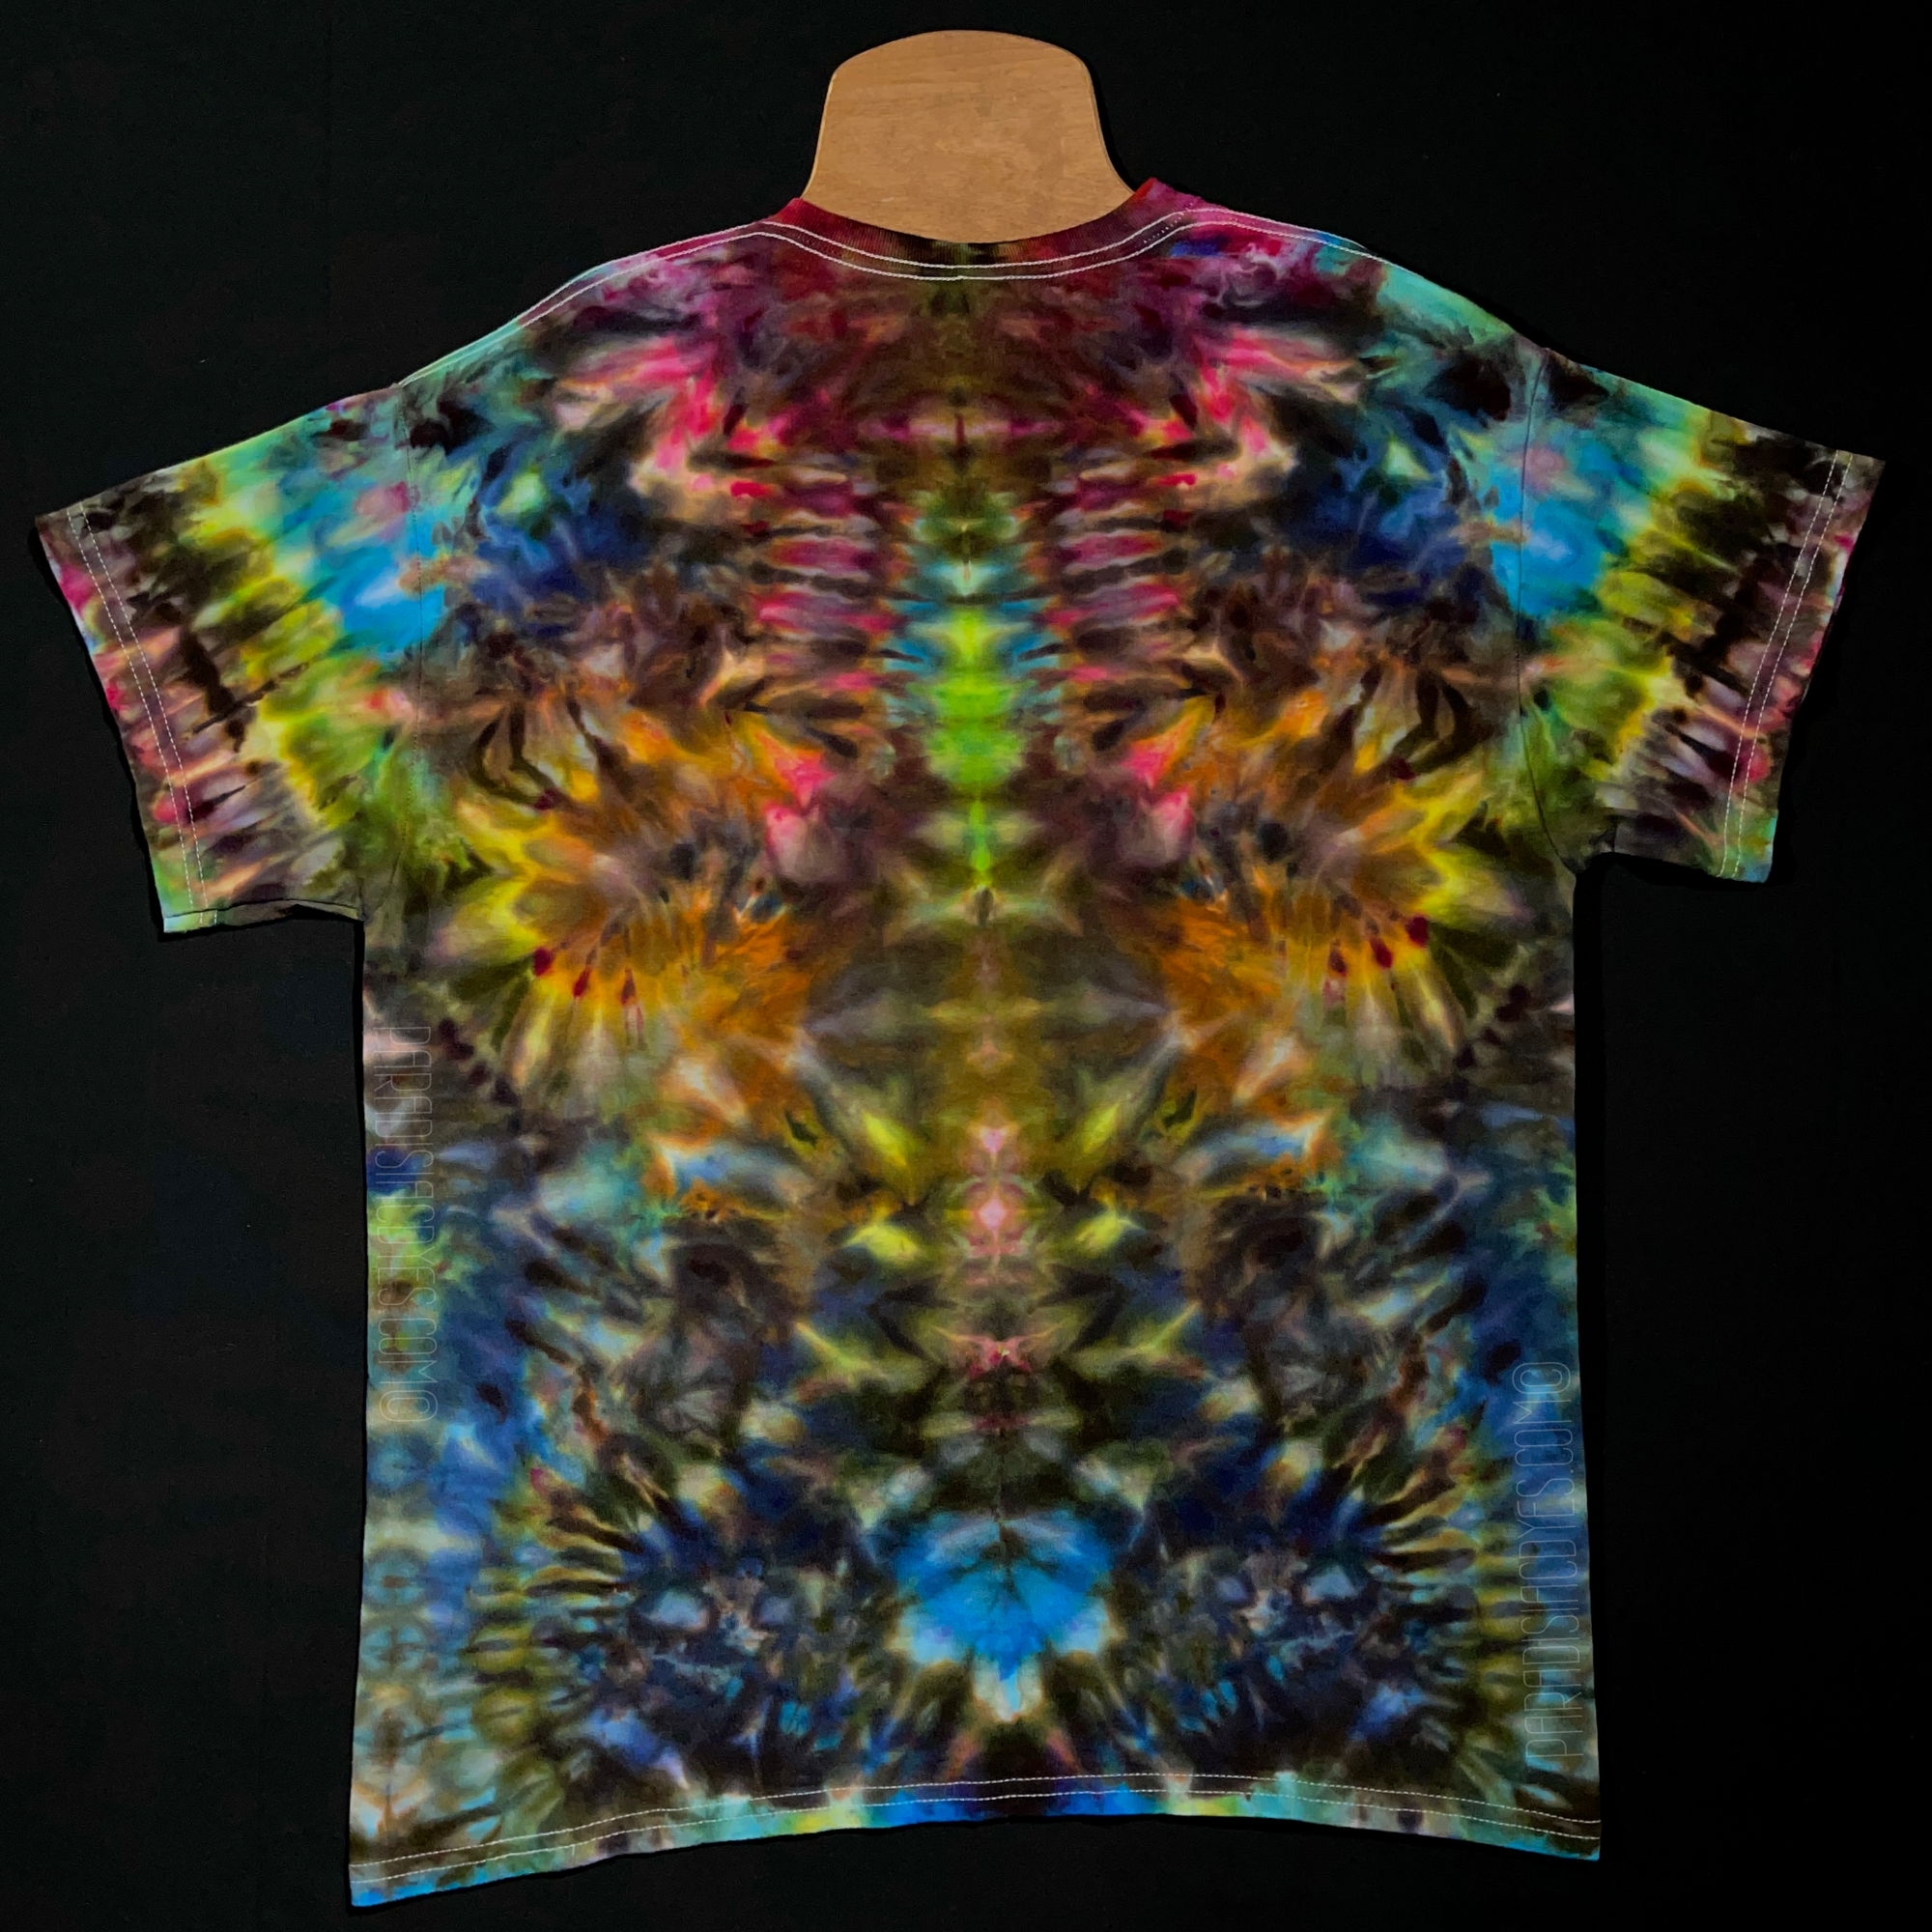 Front side of a size large psychedelic mindscape ice tie-dyed shirt design featuring vibrant neon rainbow colors in an abstract, symmetrical pattern